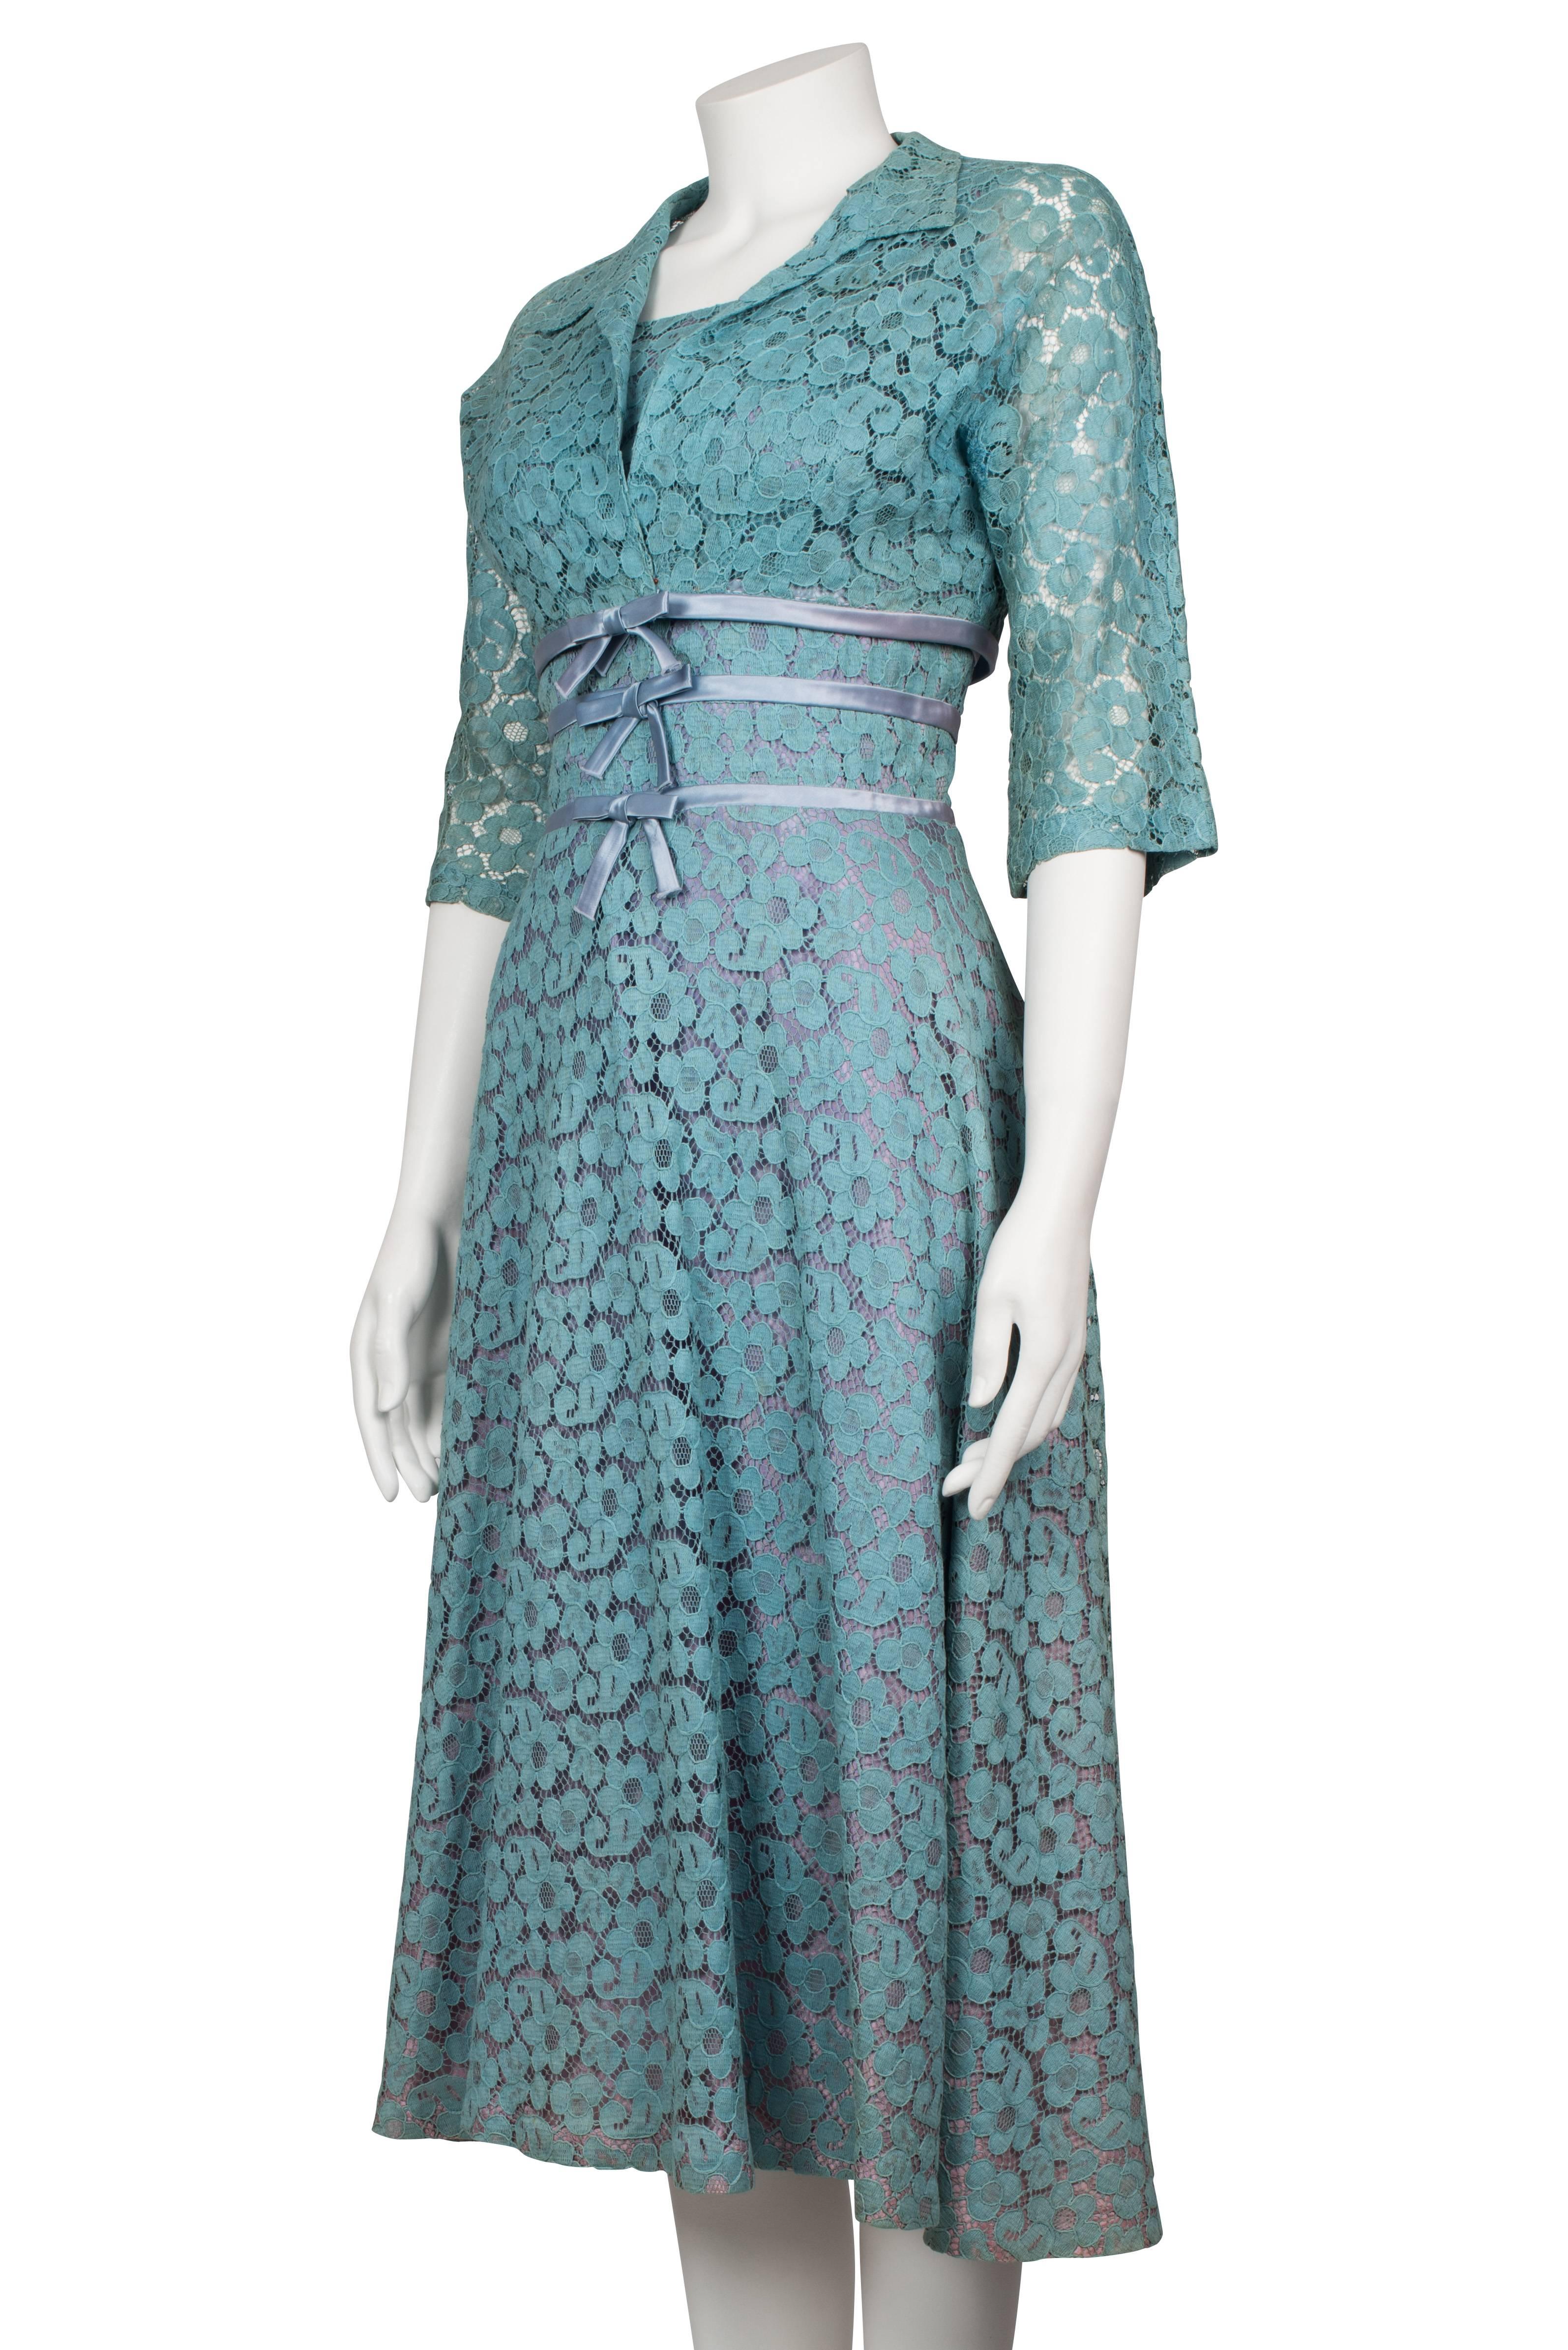 1950s Turquoise Lace and Trim Lilac Satin Trim Dress and Bolero In Excellent Condition For Sale In London, GB